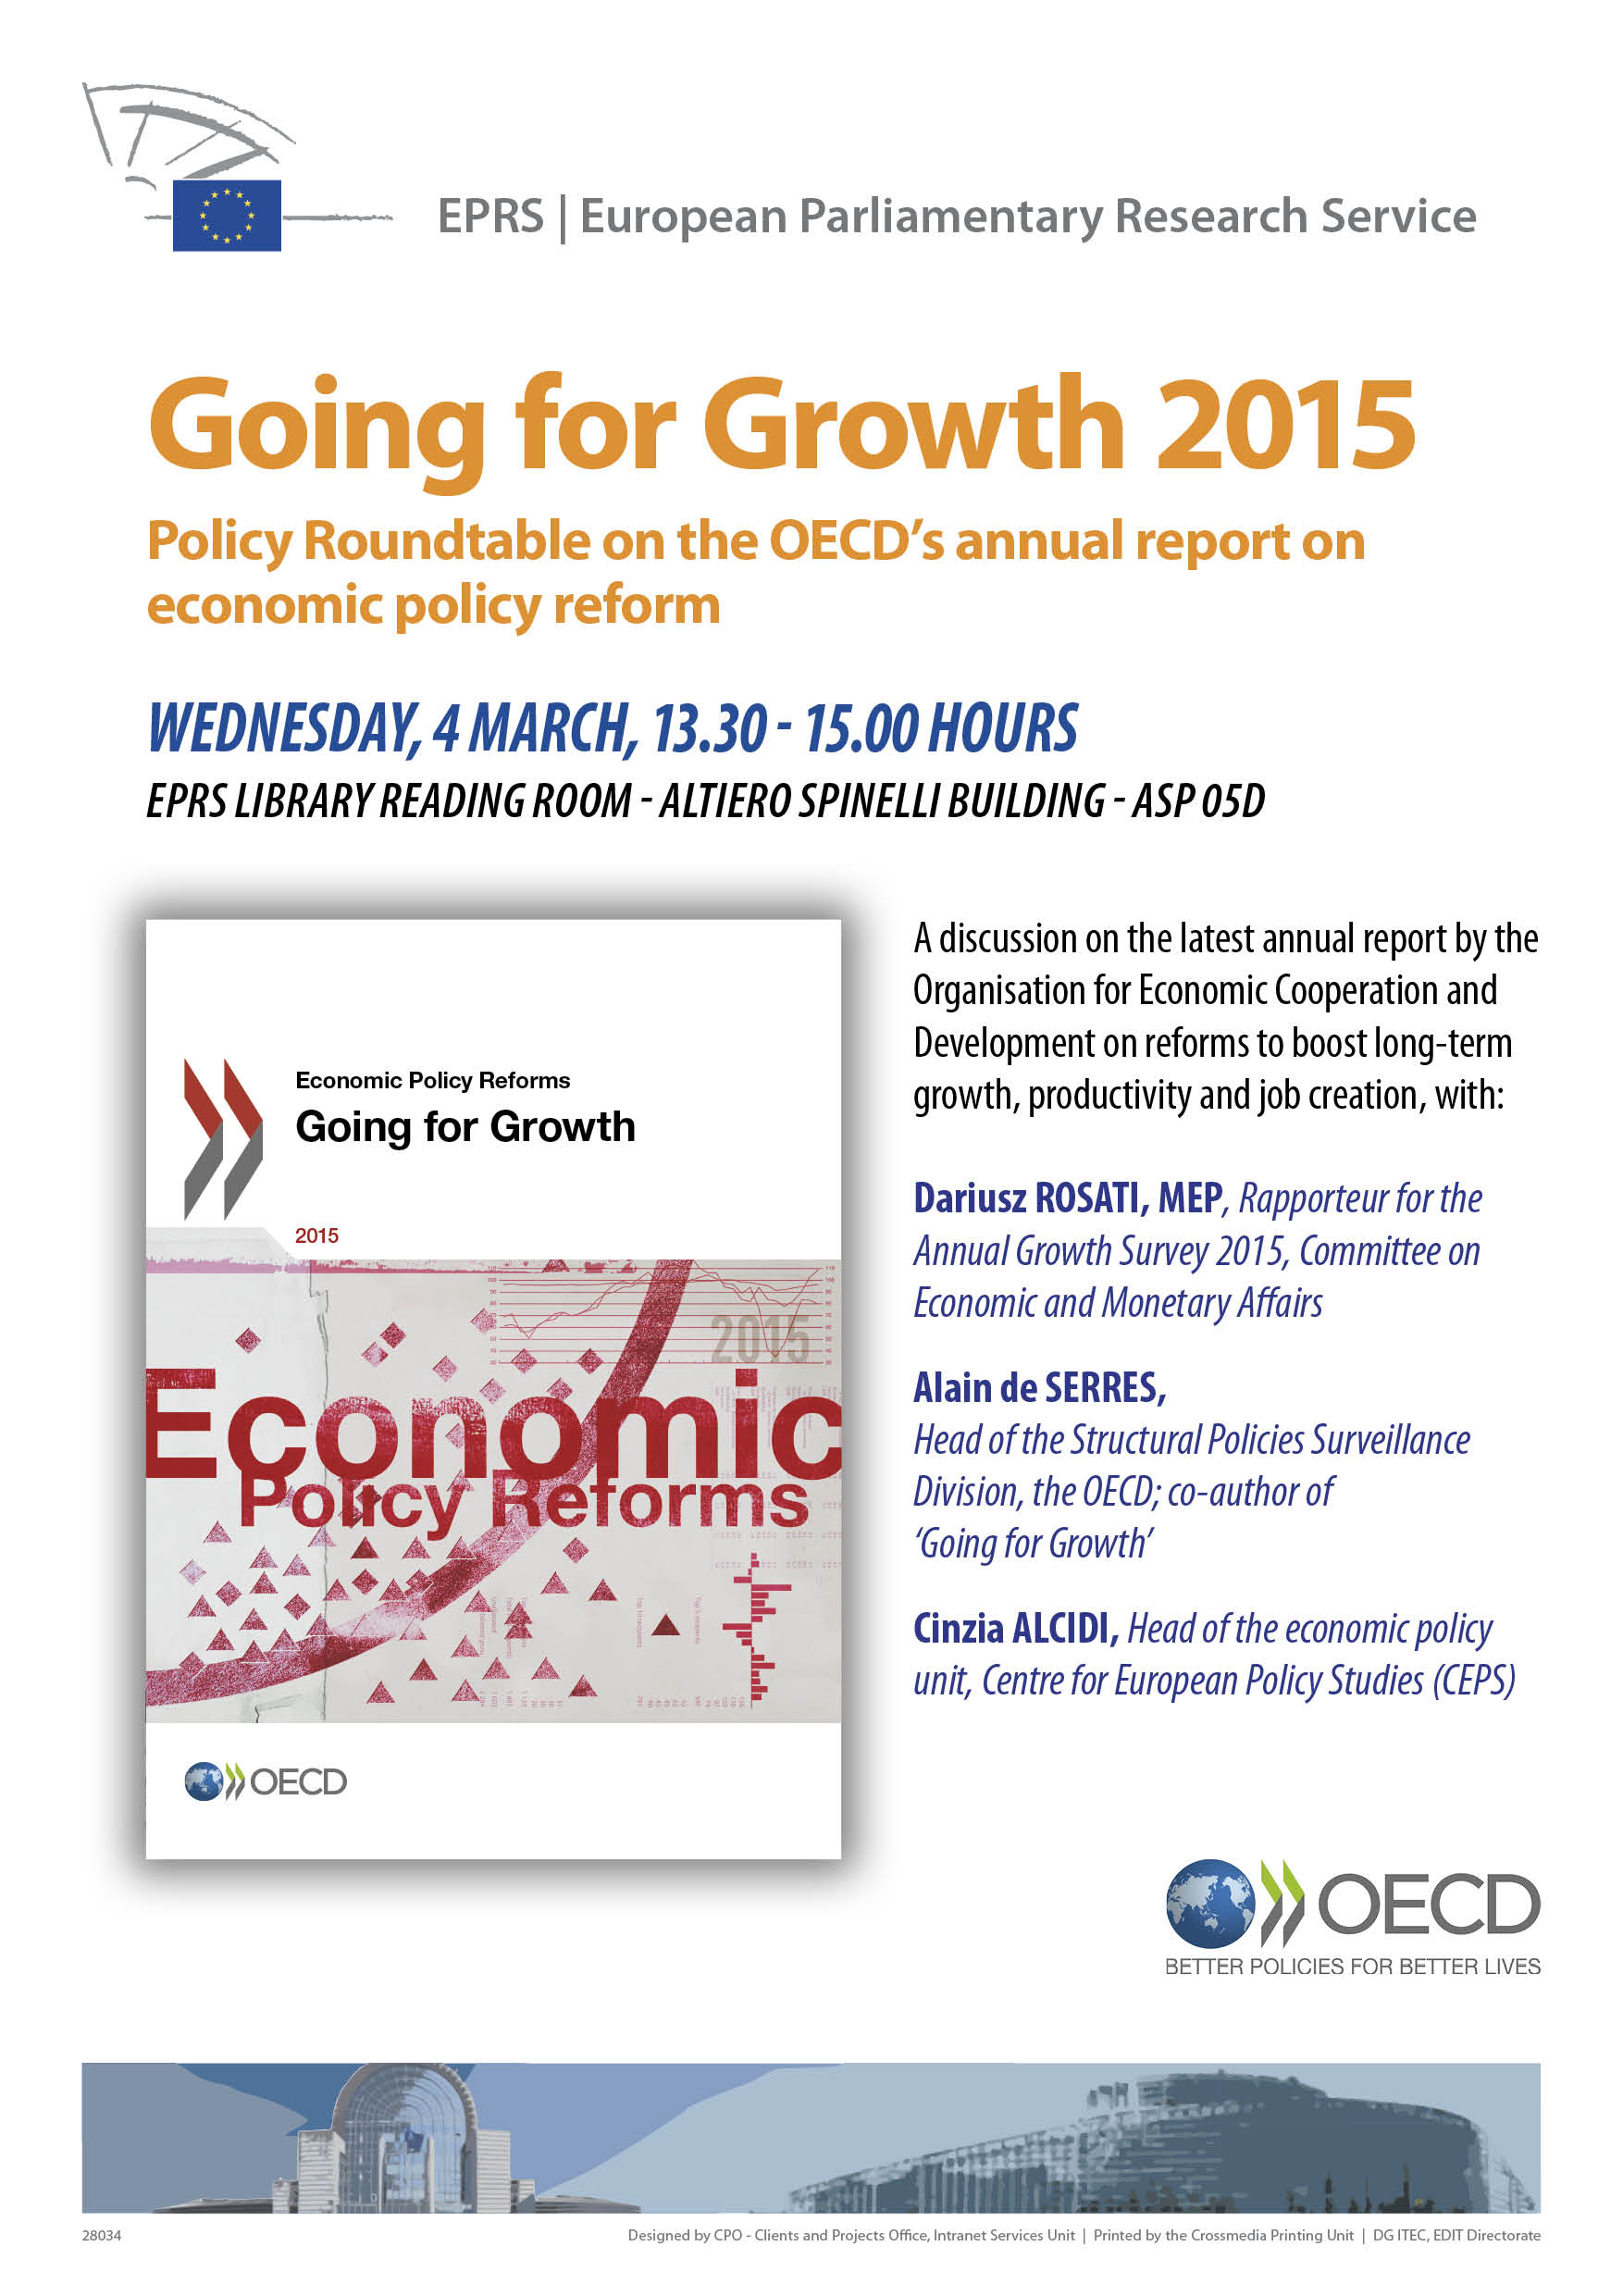 EPRS hosts debate on OECD’s flagship report on growth on 4 March 2015